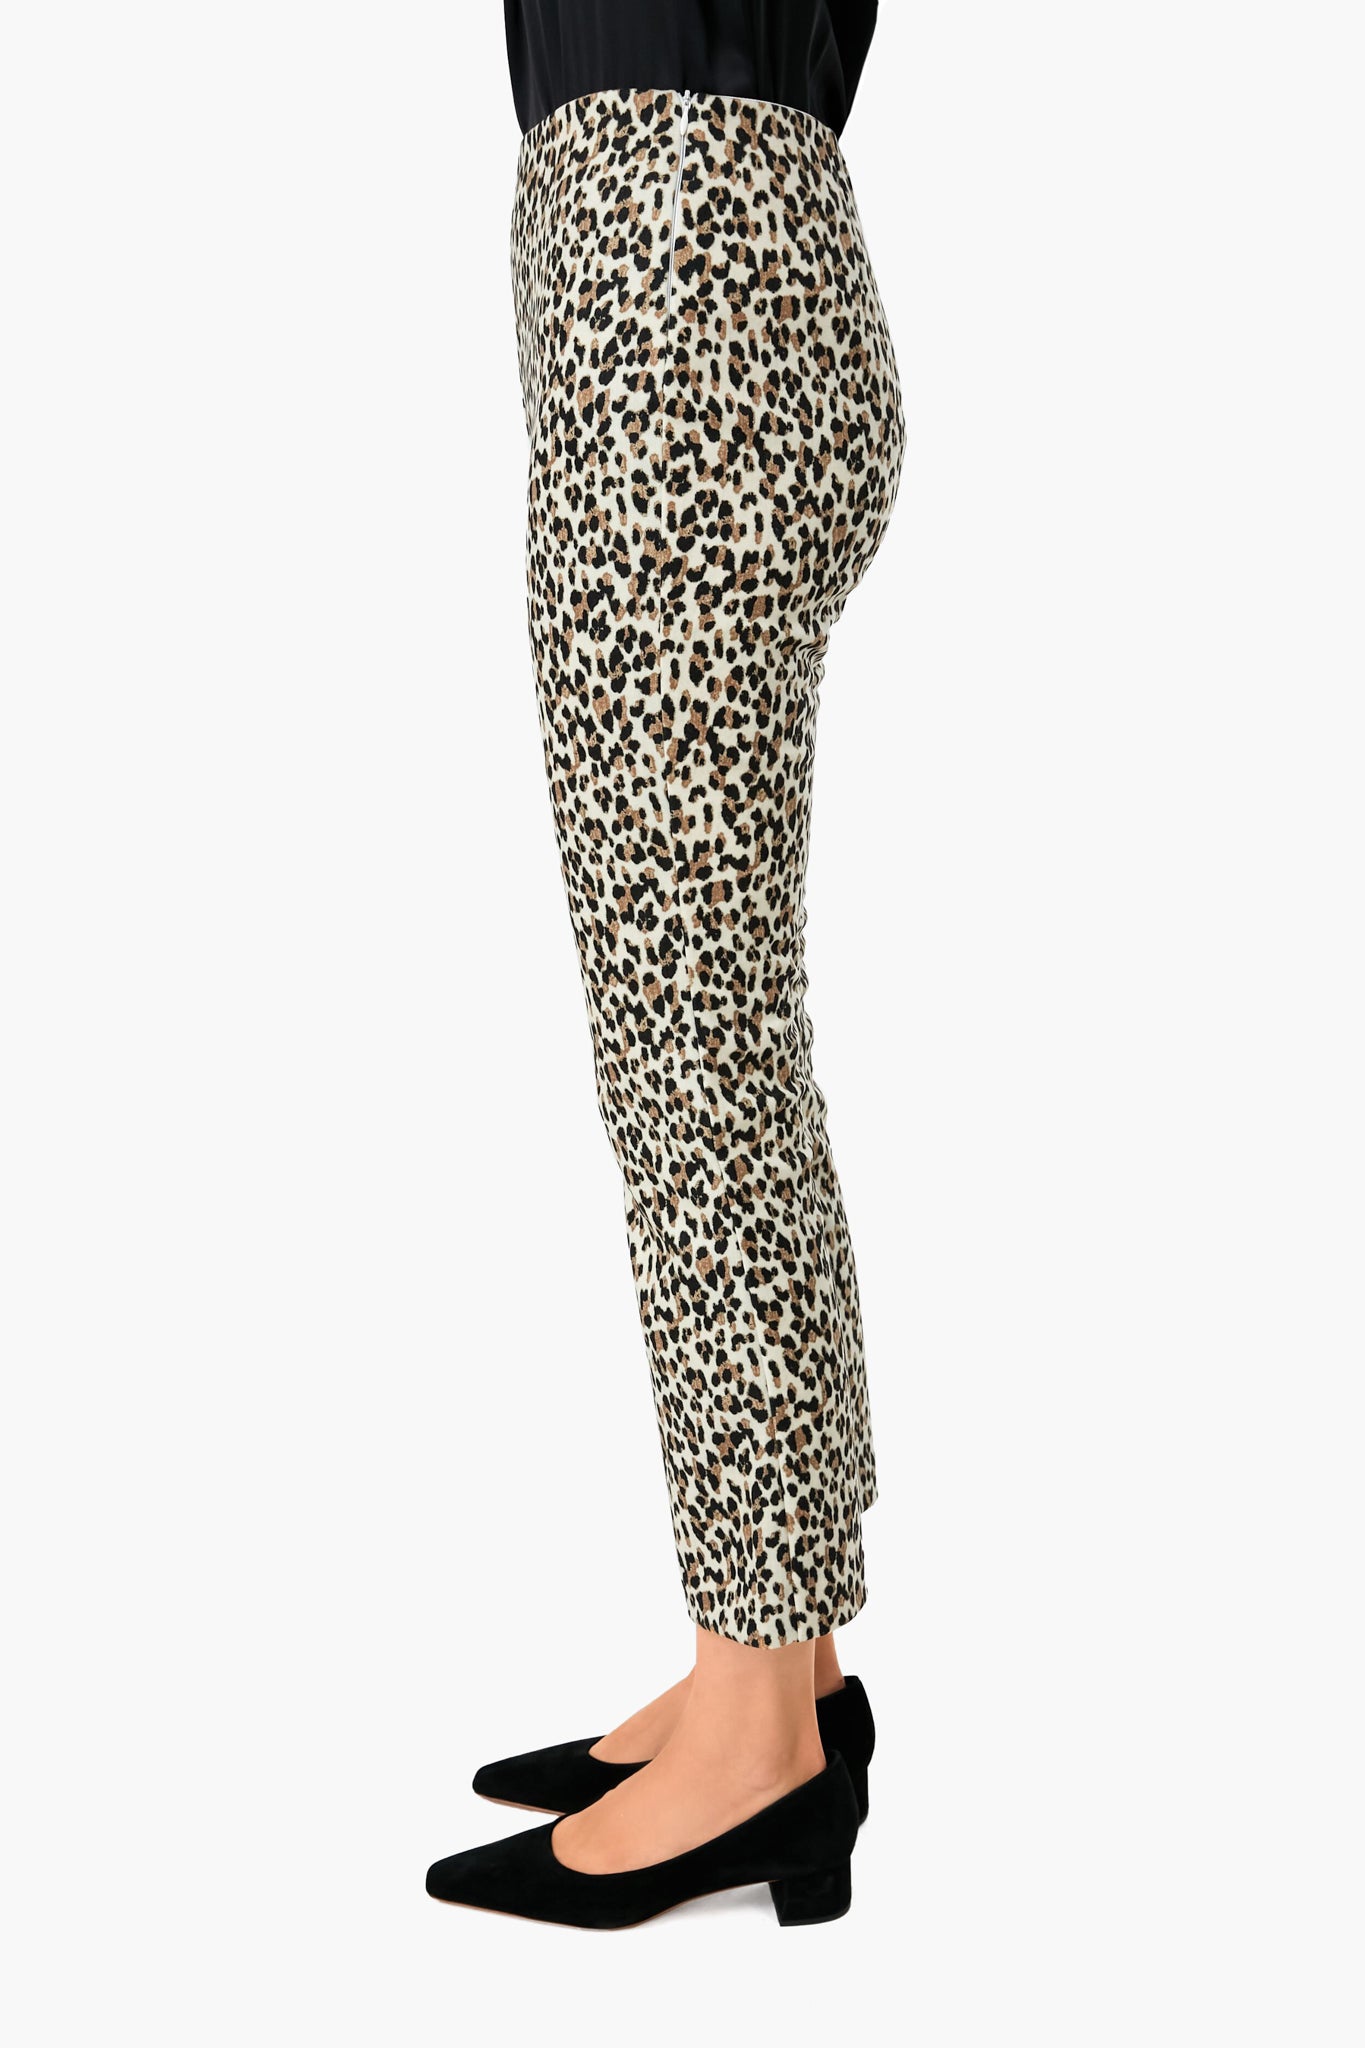 Chico's - Our Travelers™ Collection Crepe Ankle Pants are